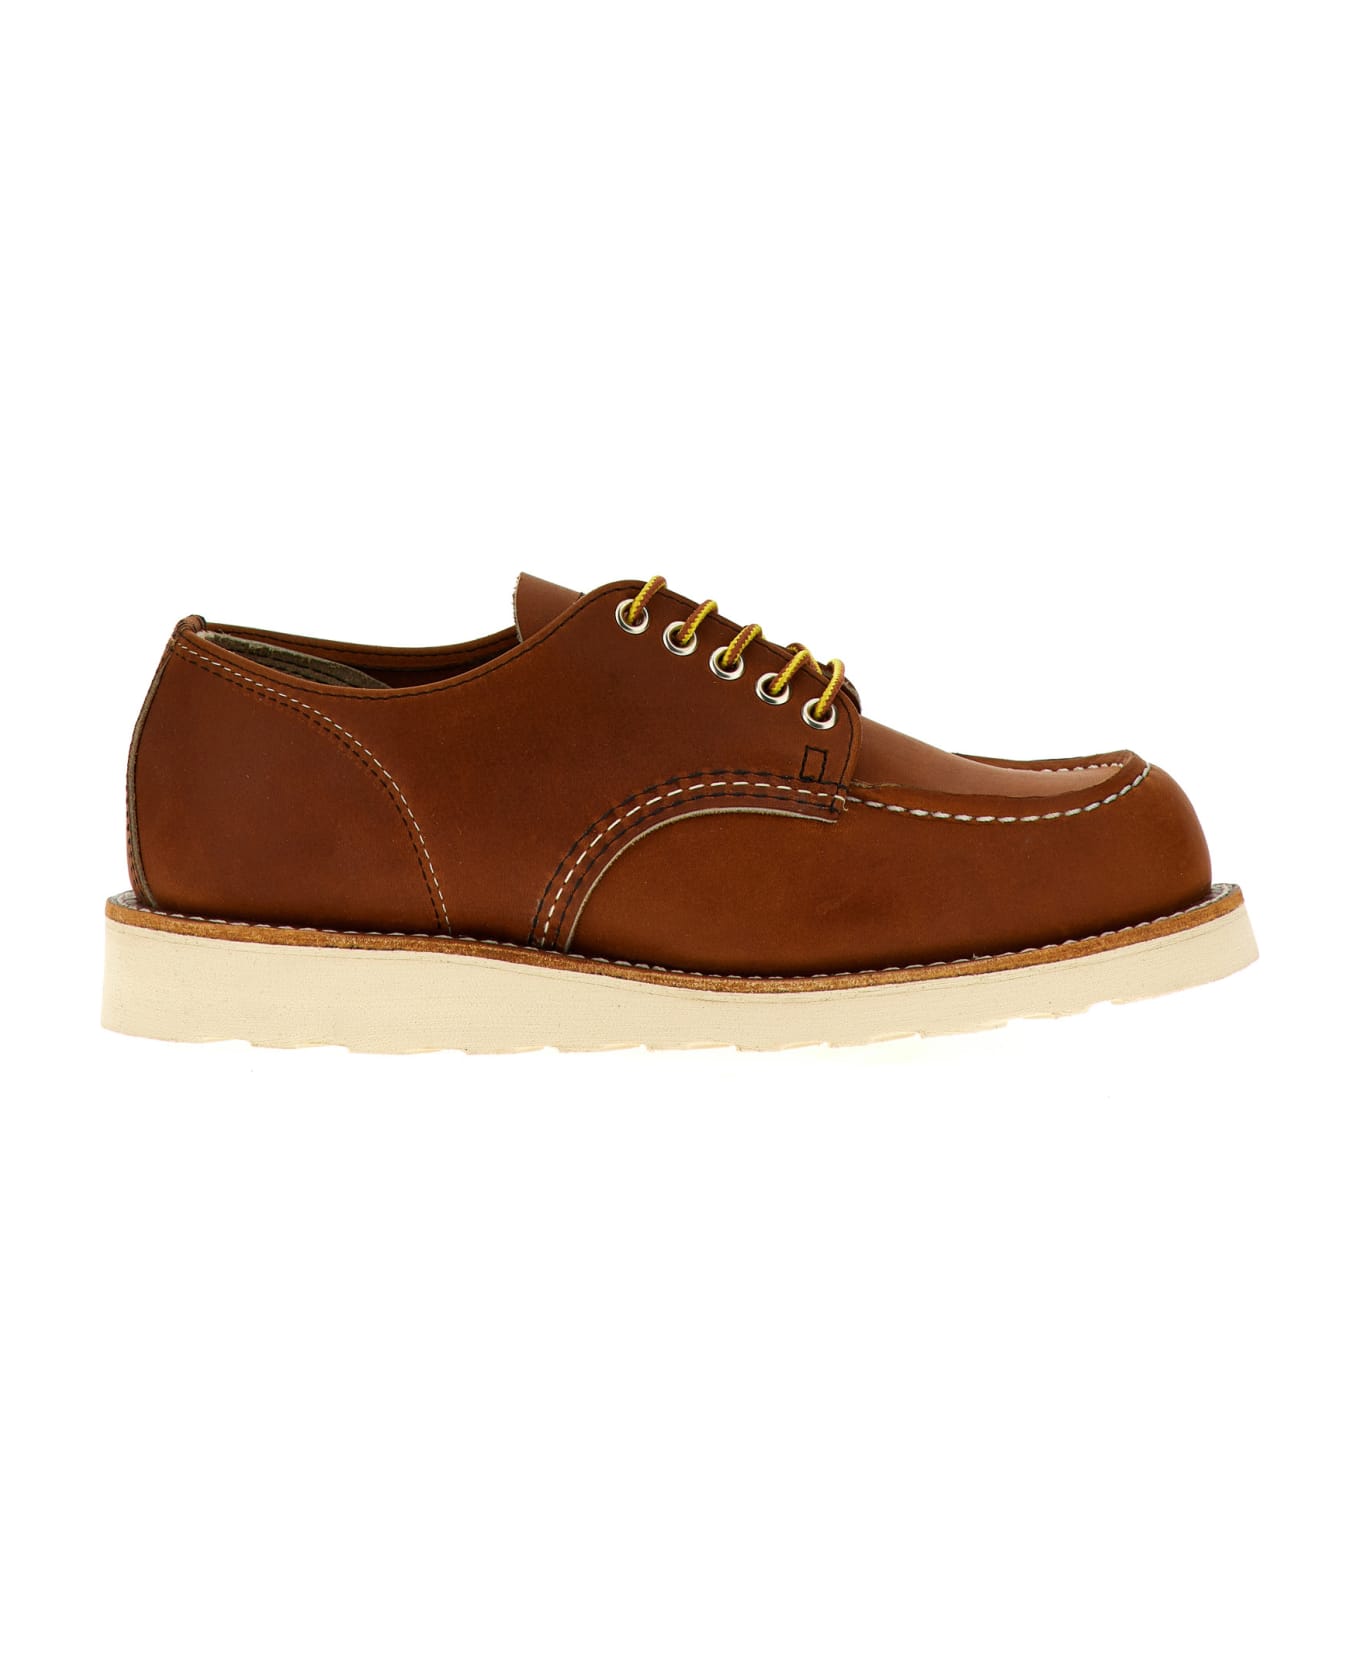 Red Wing 'shop Moc Oxford' Lace Up Shoes - Brown